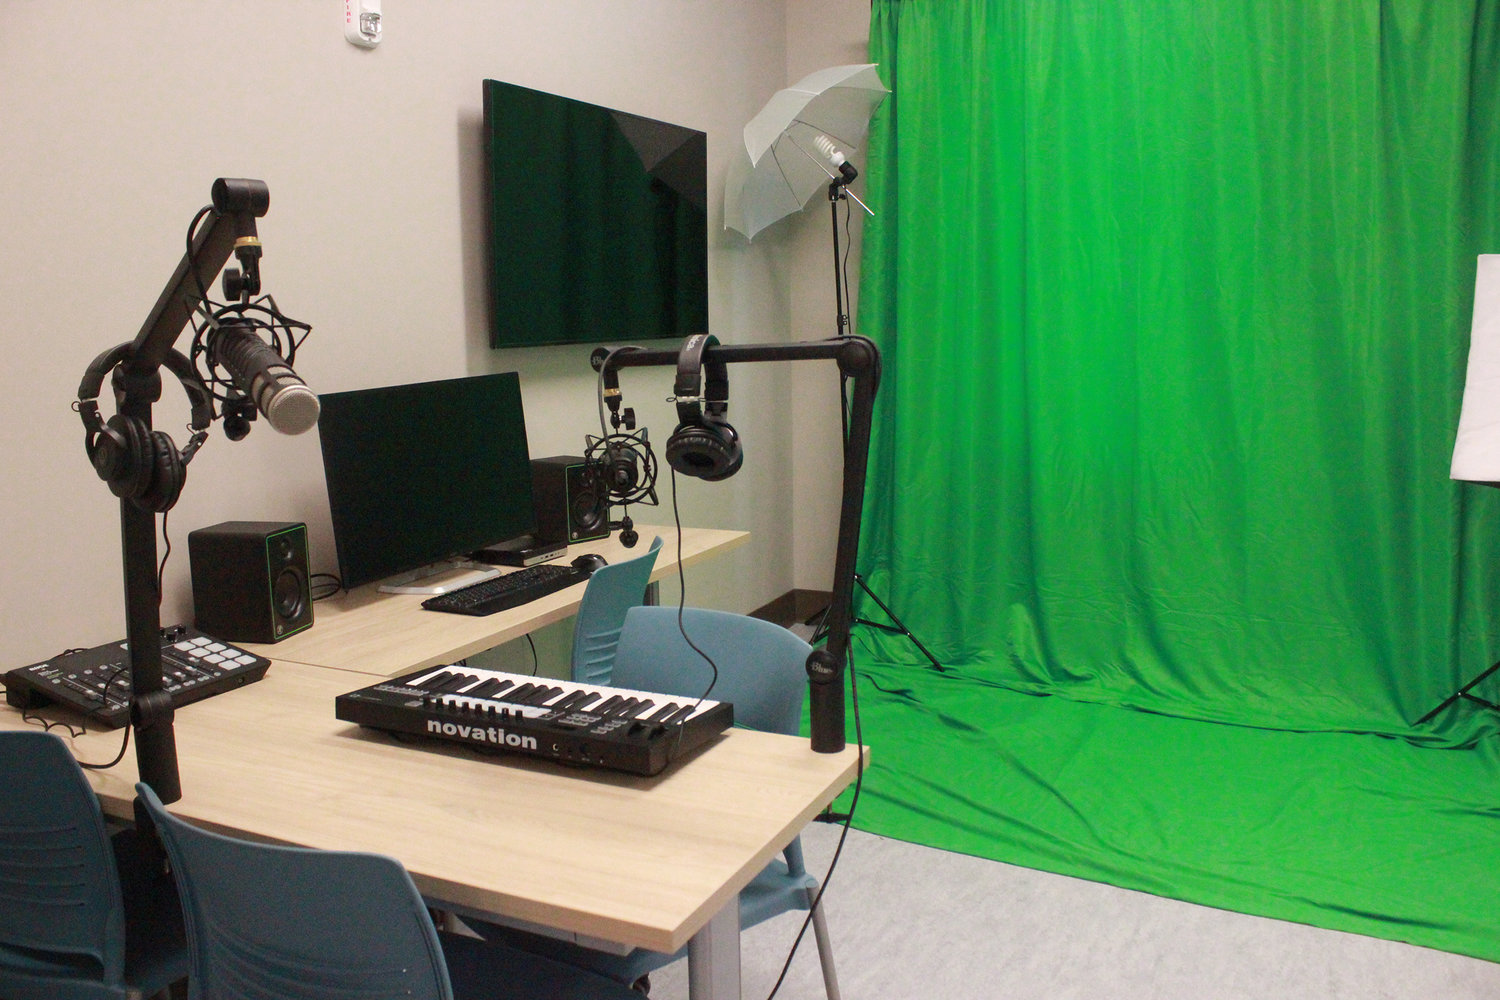 LIGHTS, CAMERA, ACTION — The Oneida Public Library’s new facility features a recording studio, ready for patrons looking to take a prom or passport photo, record a podcast, or jam on their instruments with all the tools needed to do so.